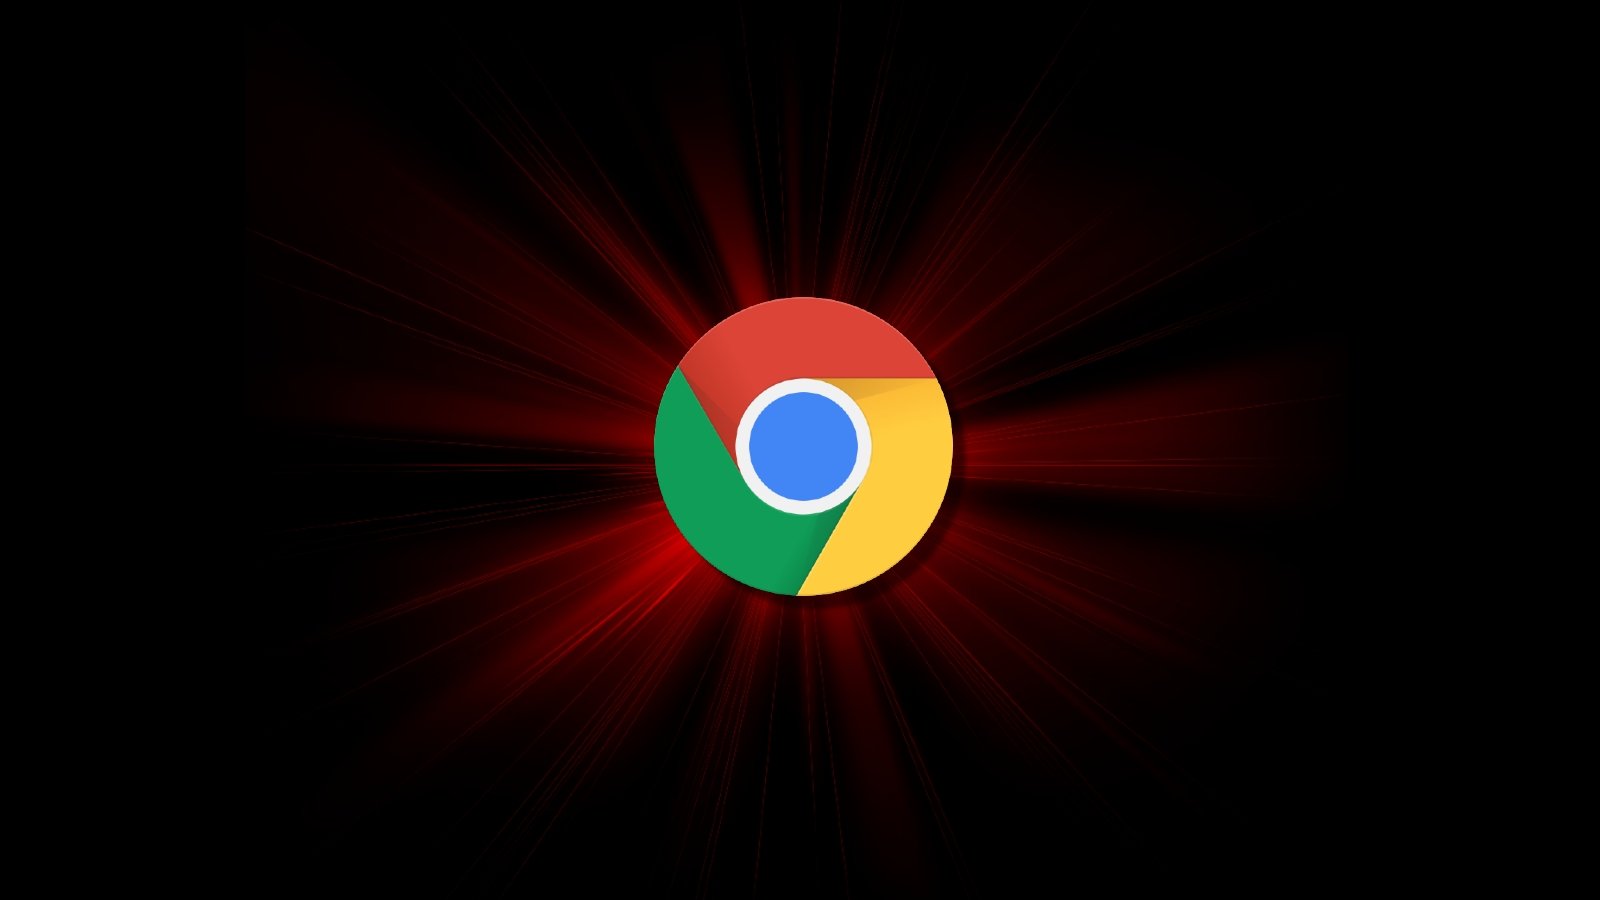 Chrome extensions with 1 million installs hijack targets’ browsers